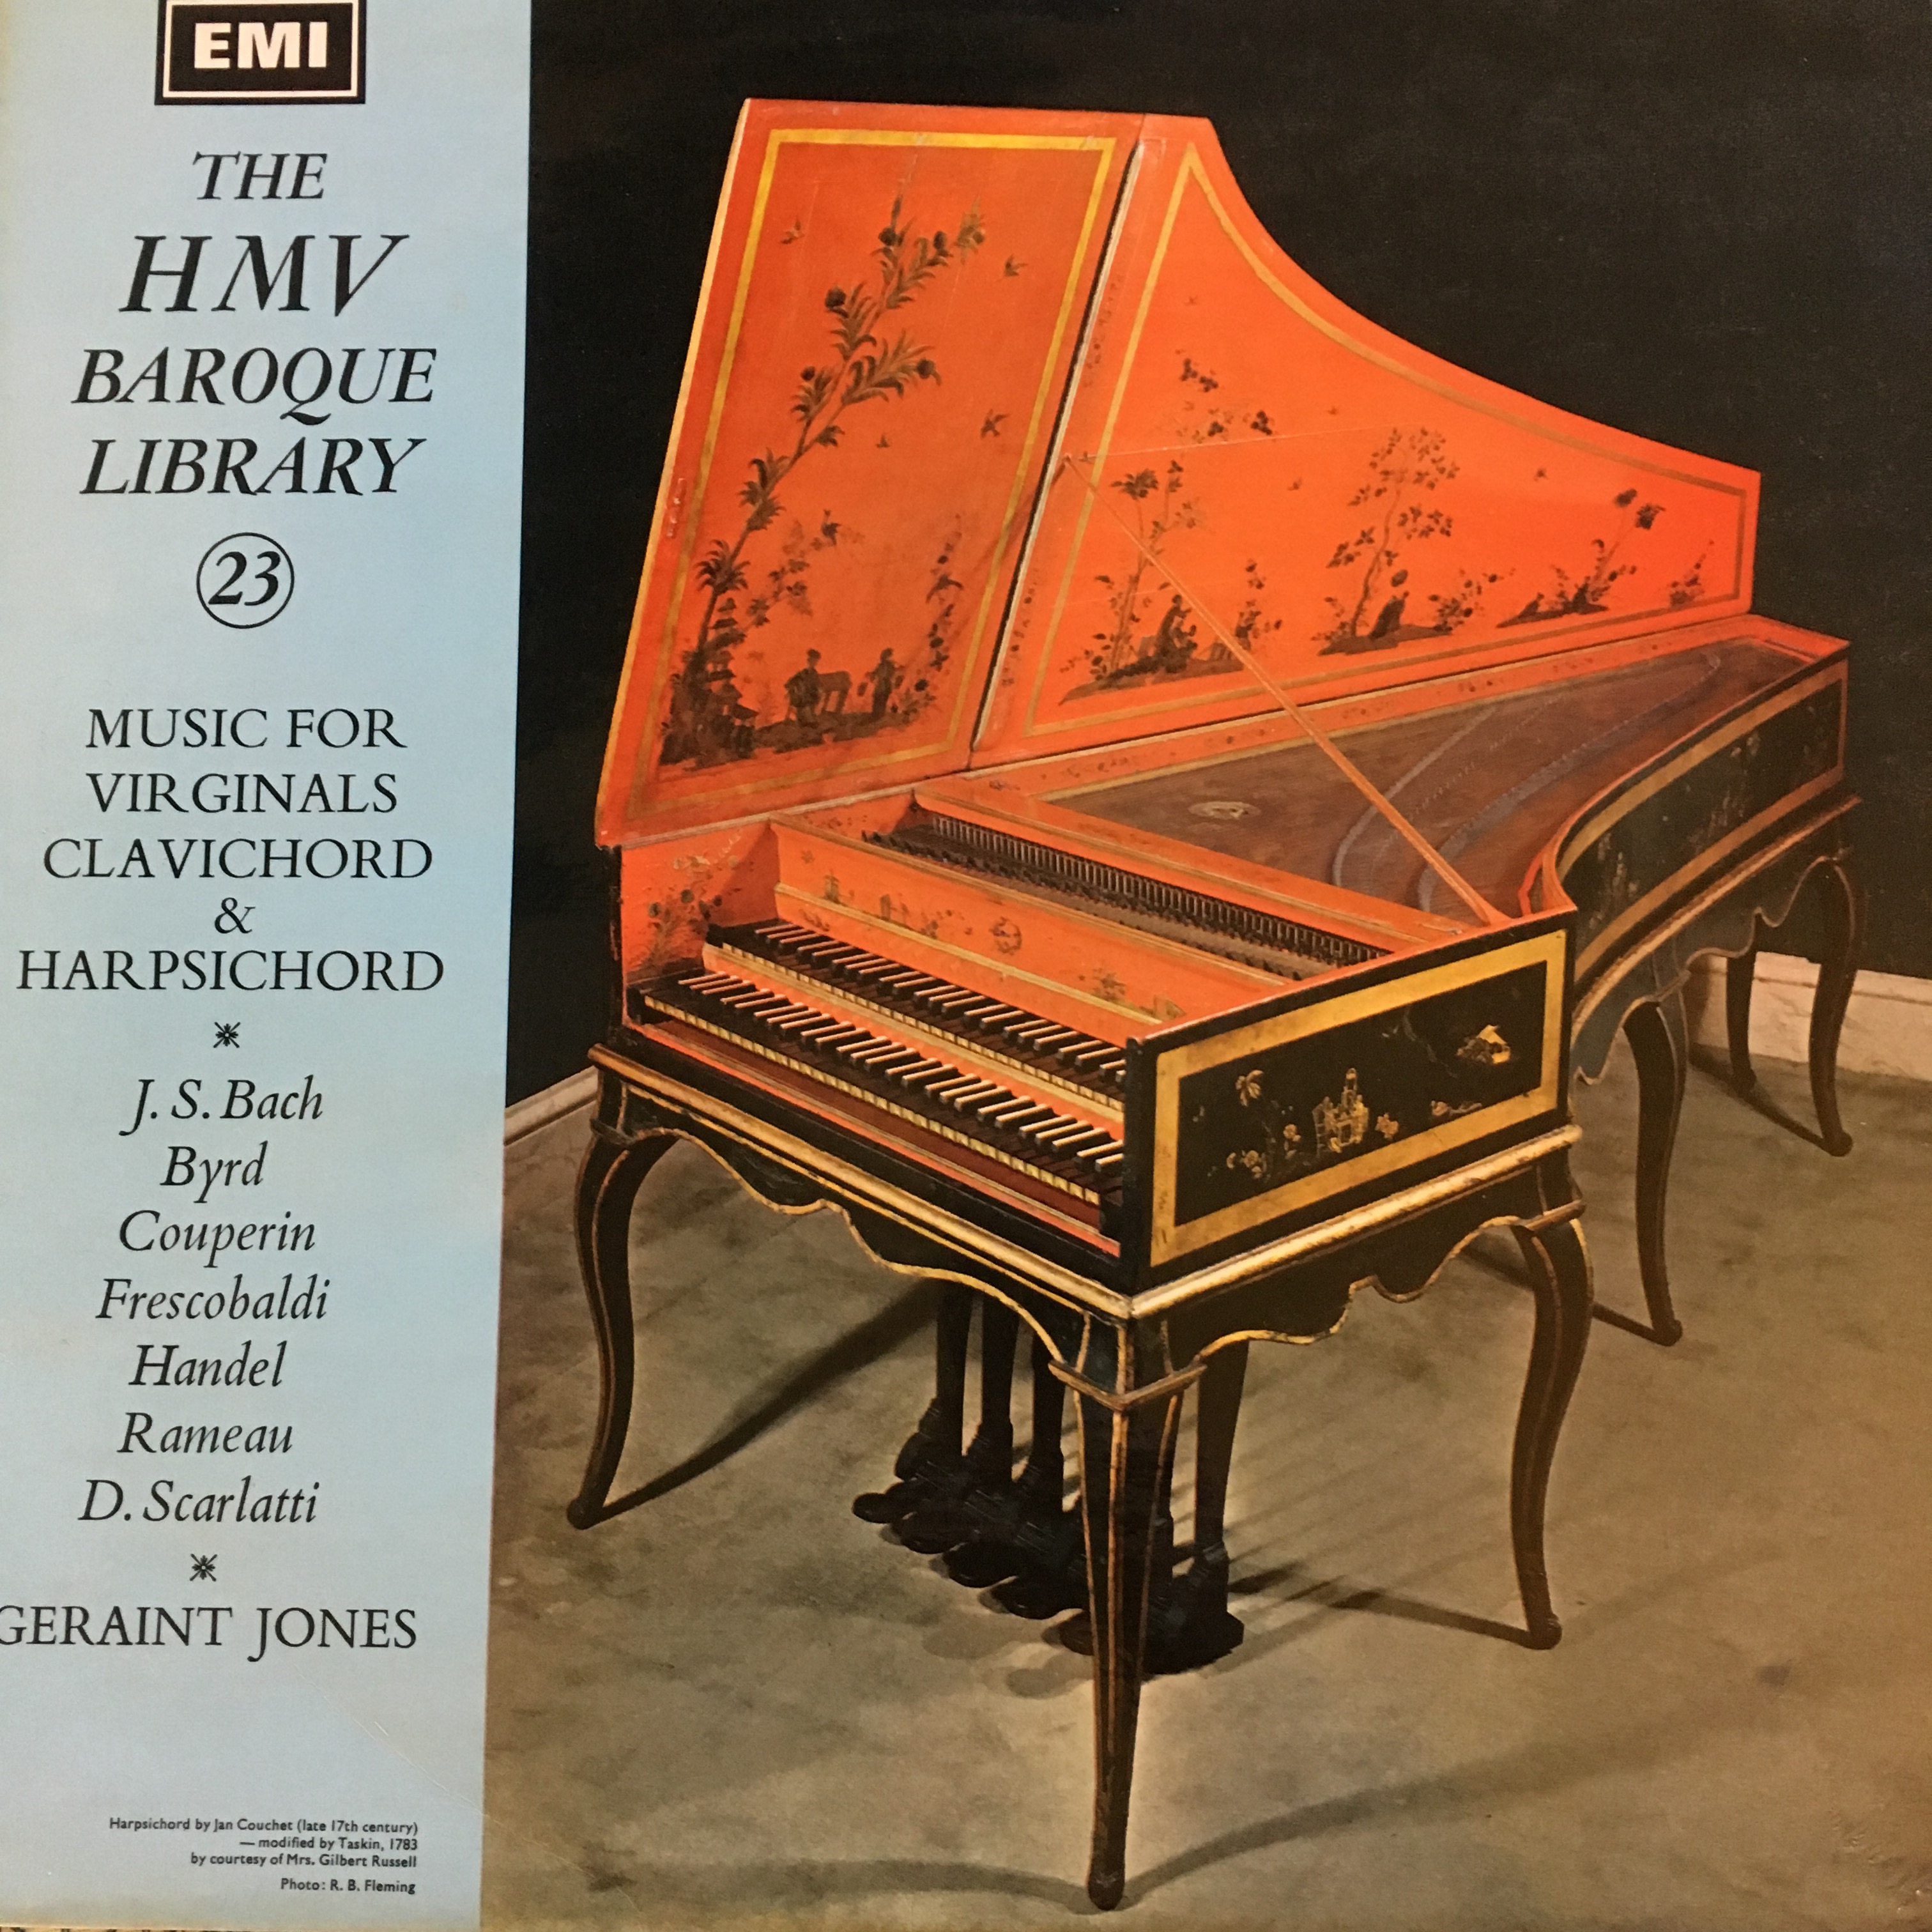 Record cover showing the Goermans Taskin harpsichord at Mottisfont. The harpsichord is black and gold and features red underneath the lid